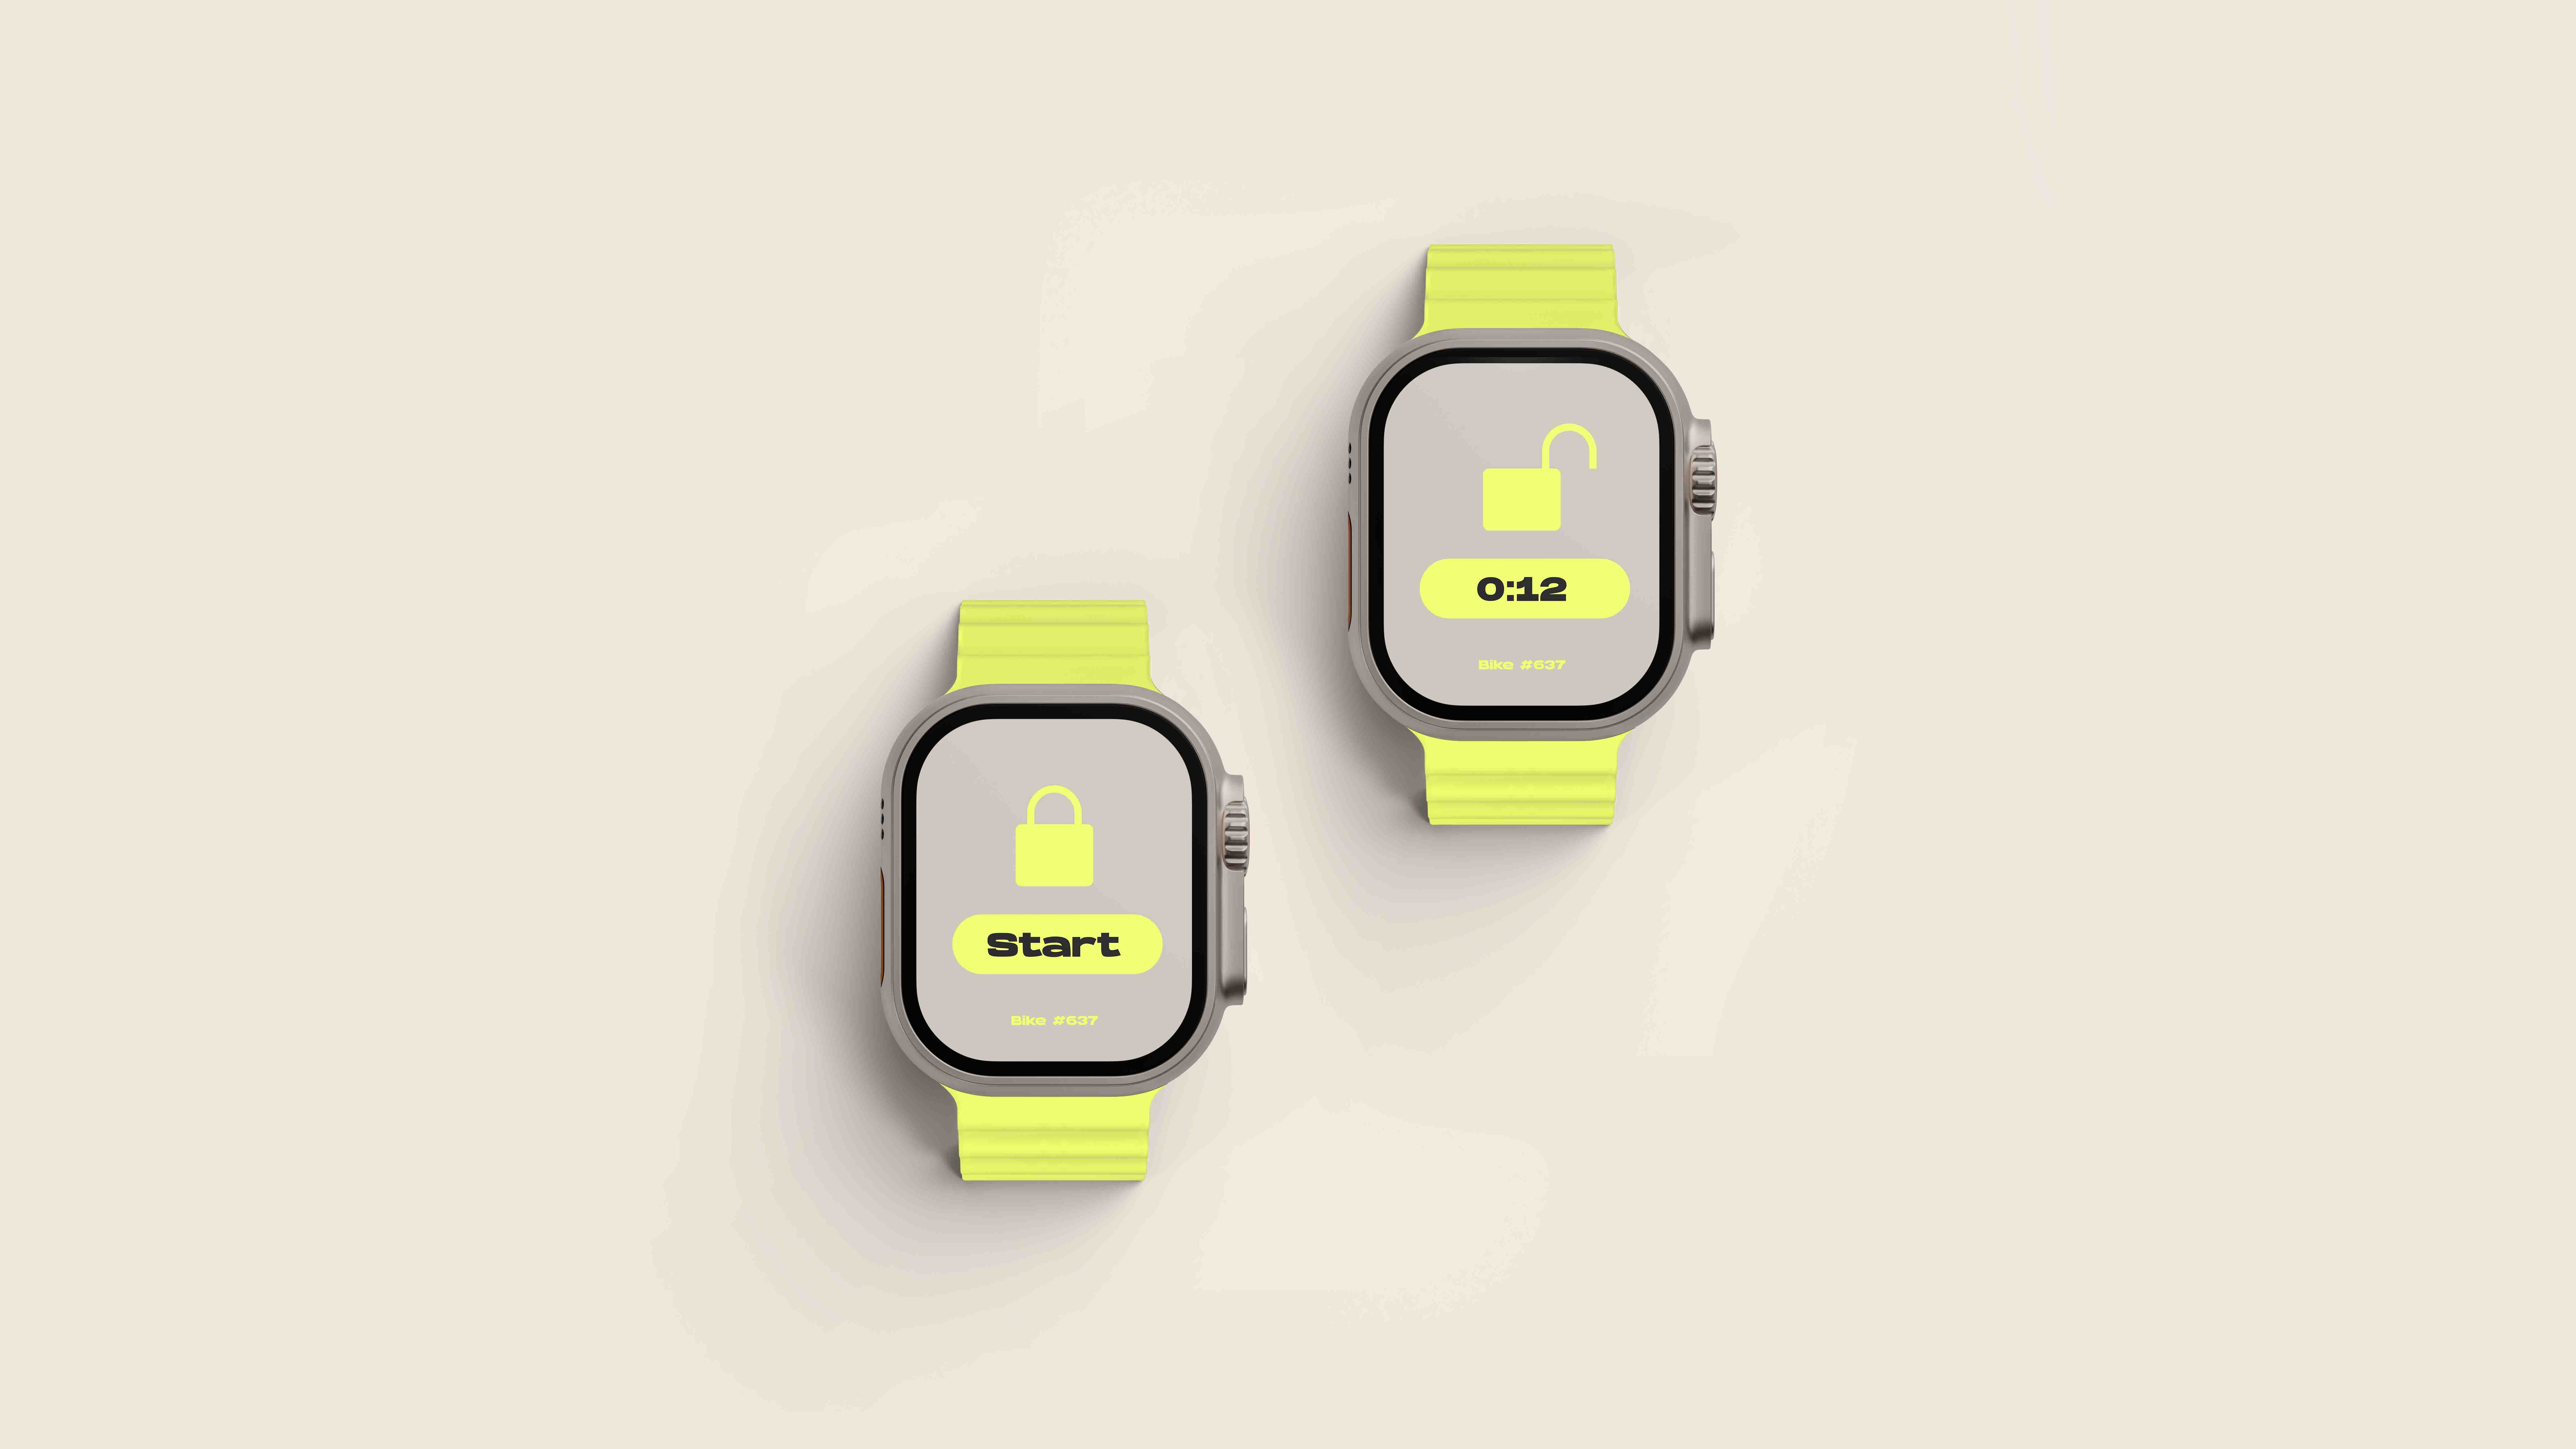 A watch interface for a Montral based bikeshare company